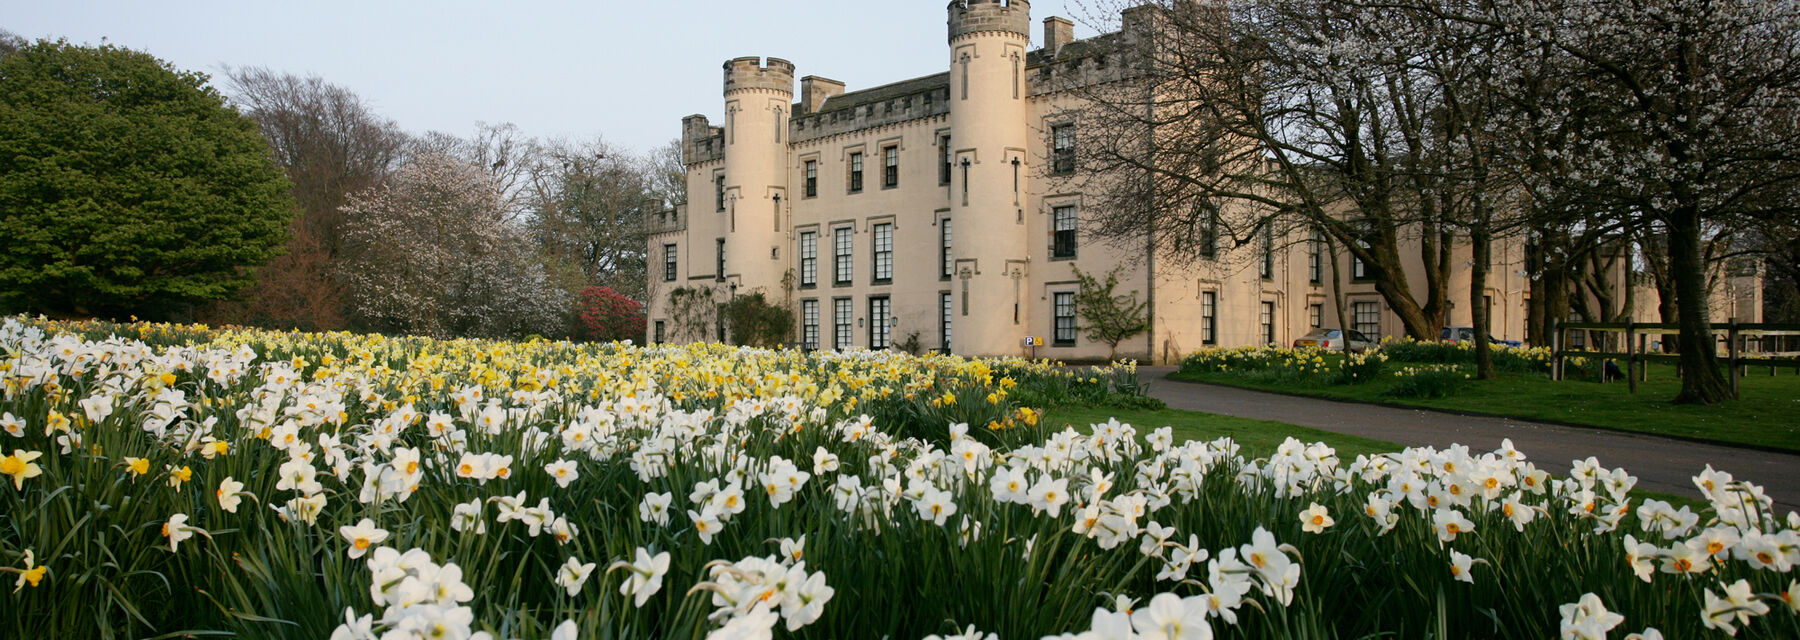 The exterior of the House of the Binns, with a carpet of pale yellow daffodils on the lawn in front.